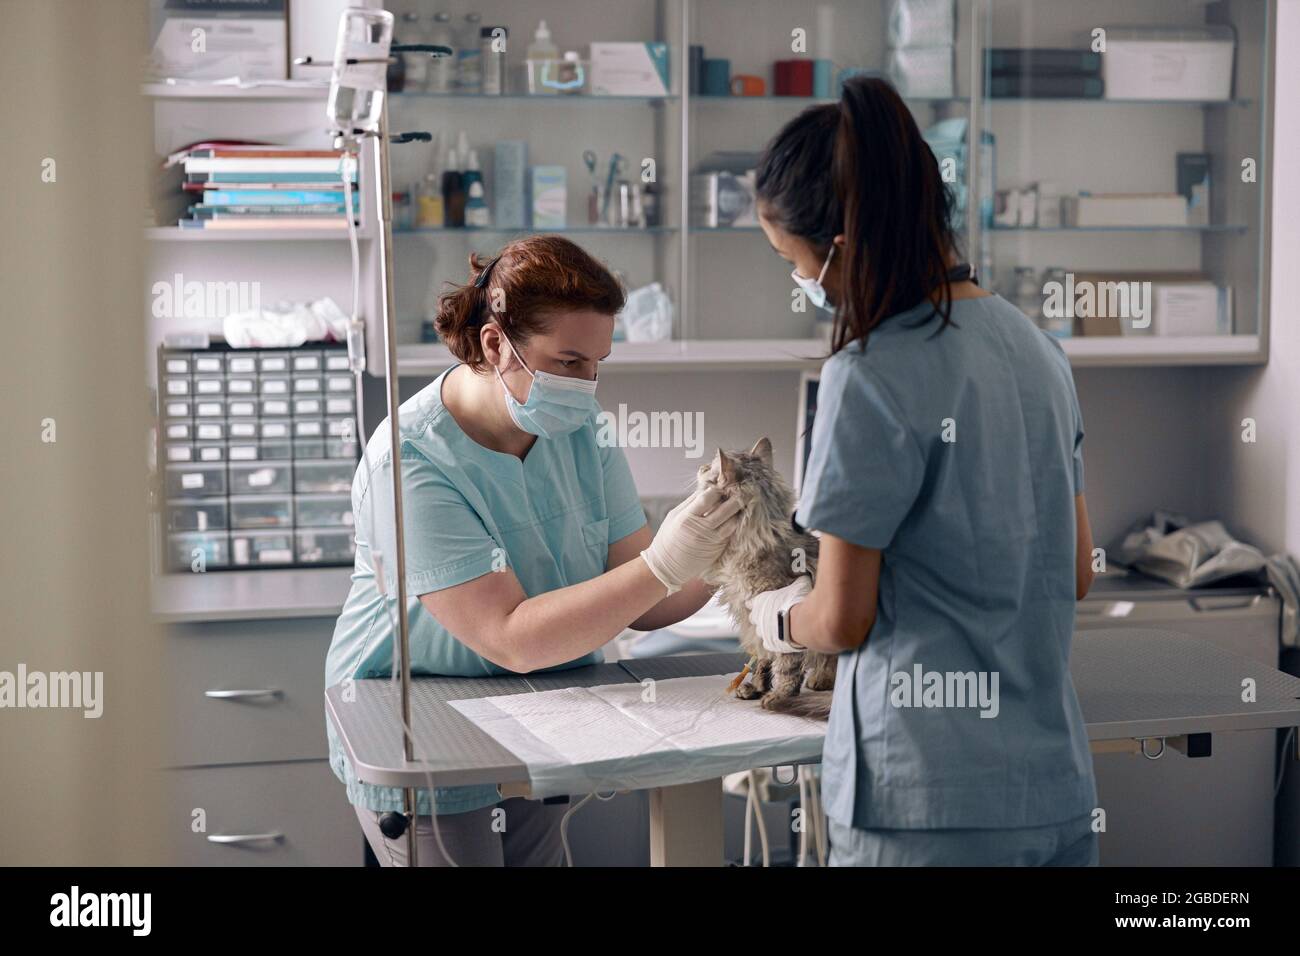 Nurse holds fluffy cat while veterinarian examines animal in hospital Stock Photo